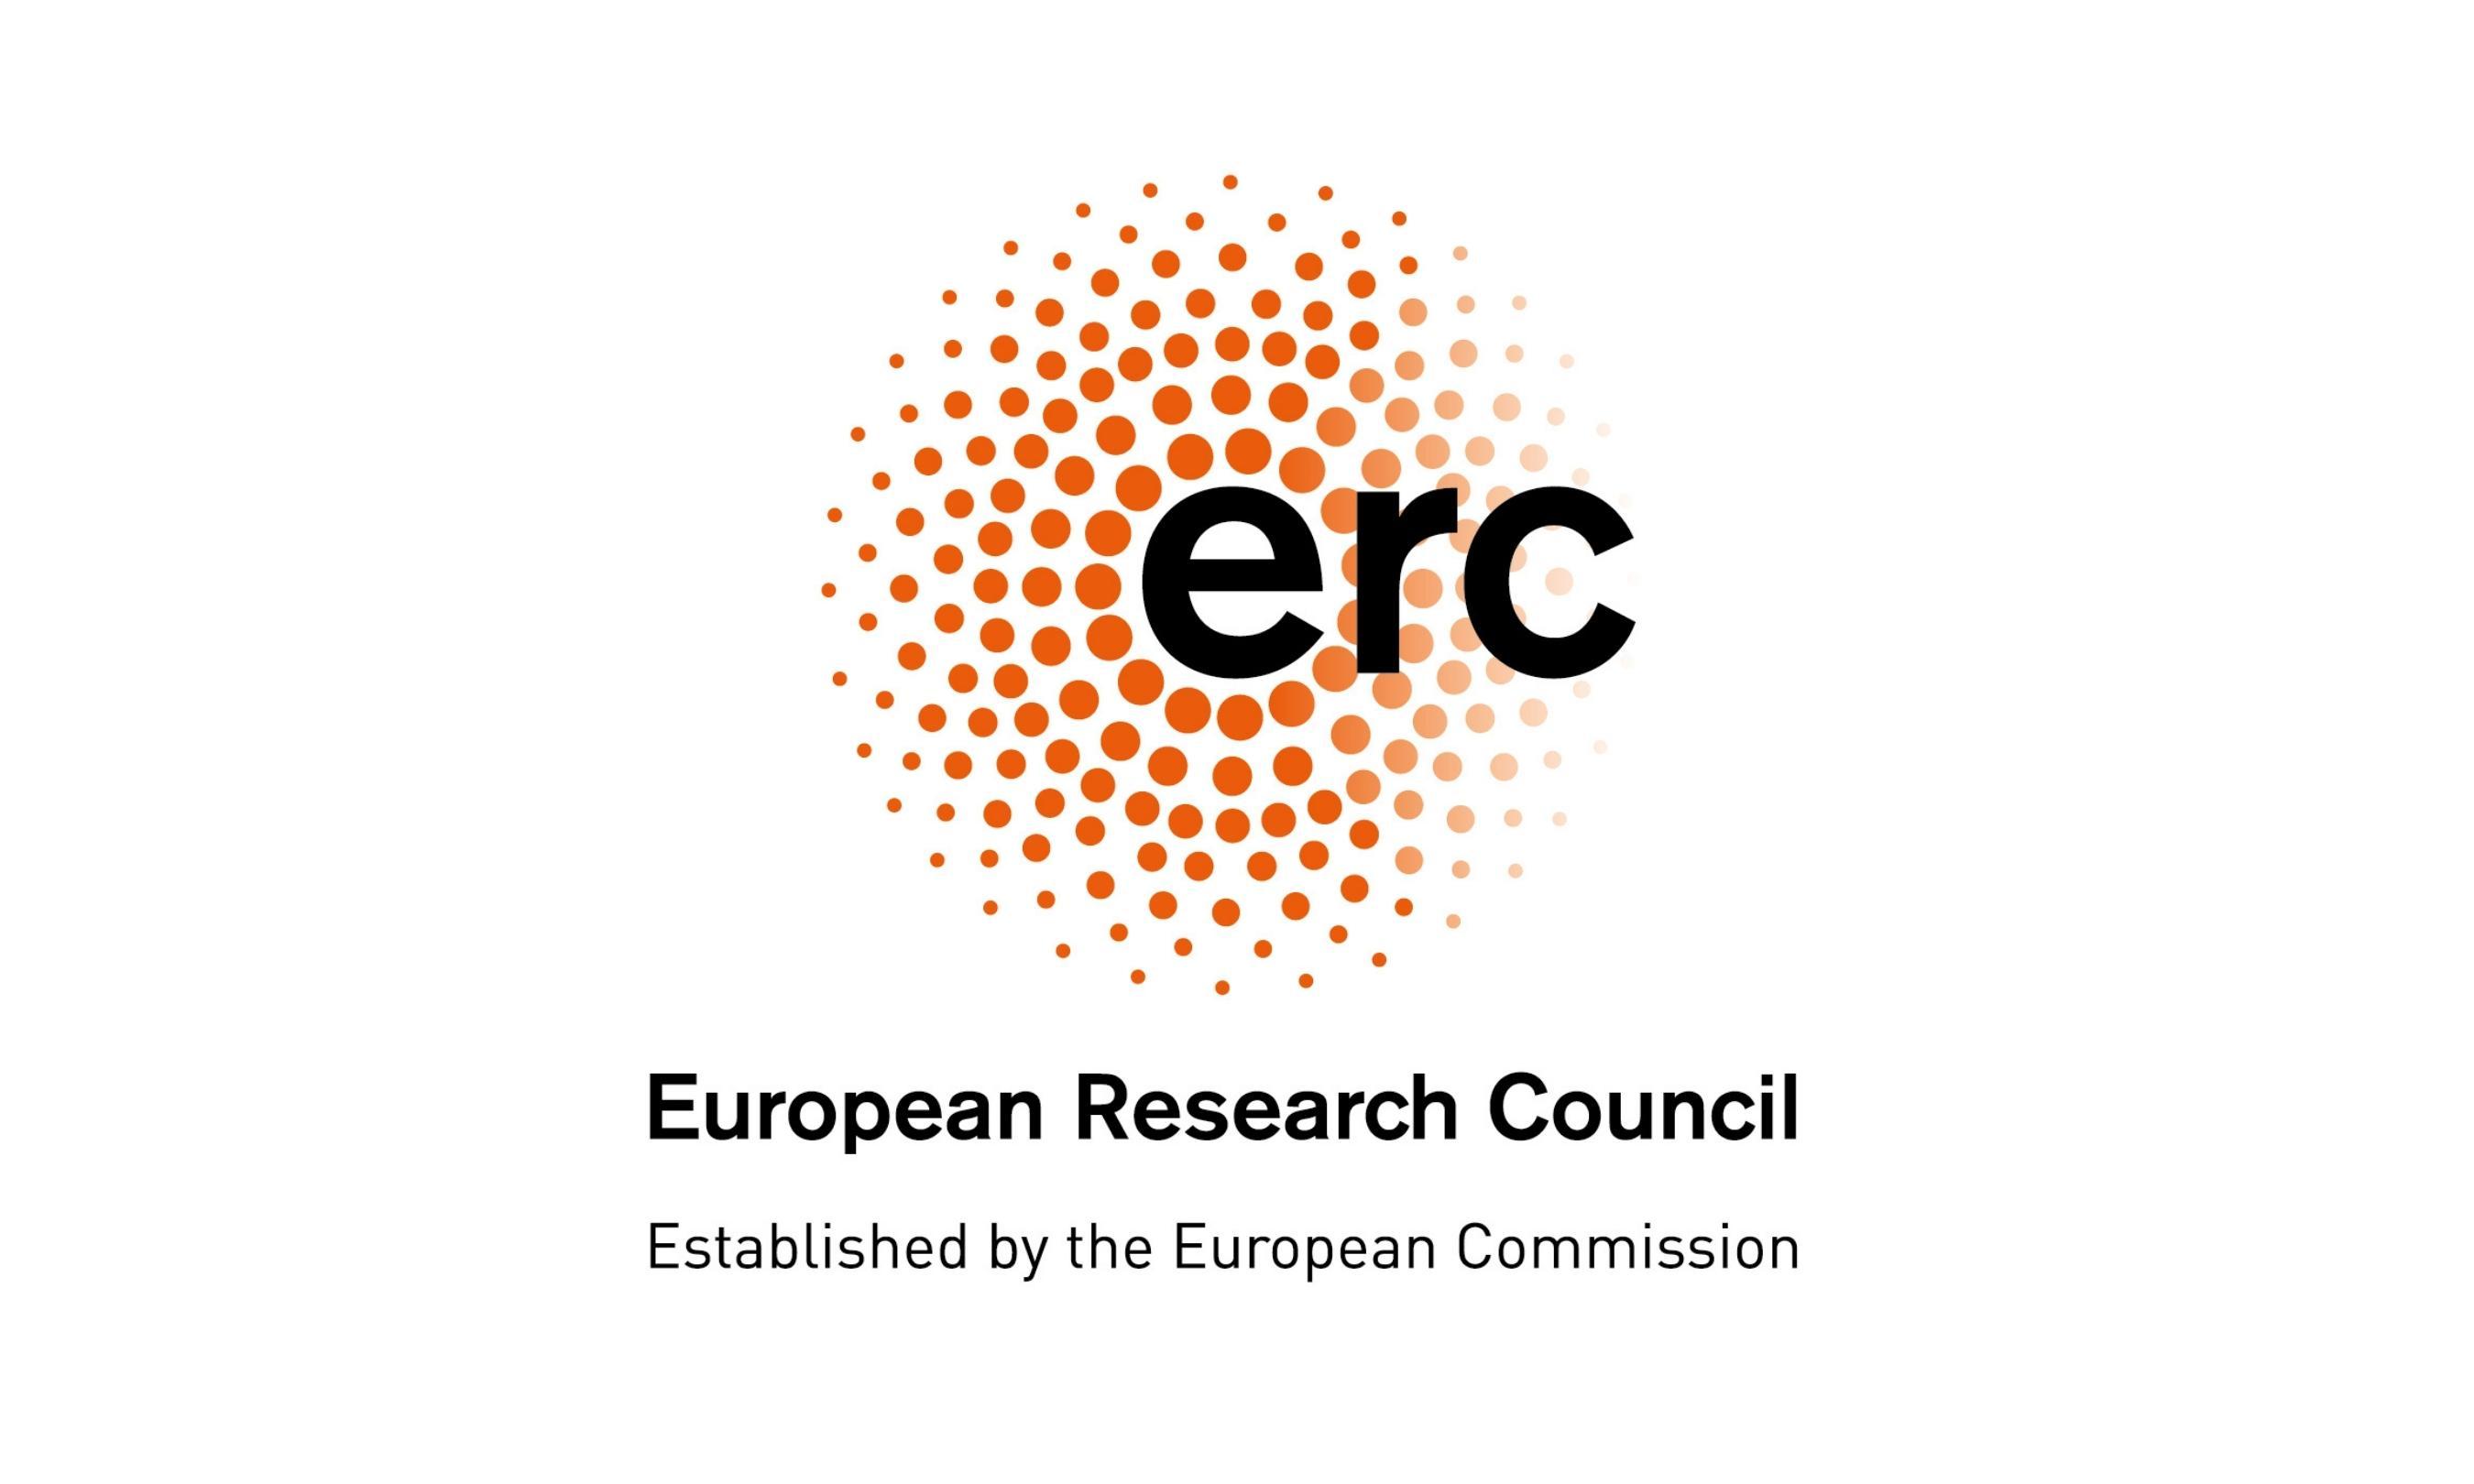 Cover image of Statement by ERC President reaffirming commitment to equal opportunities